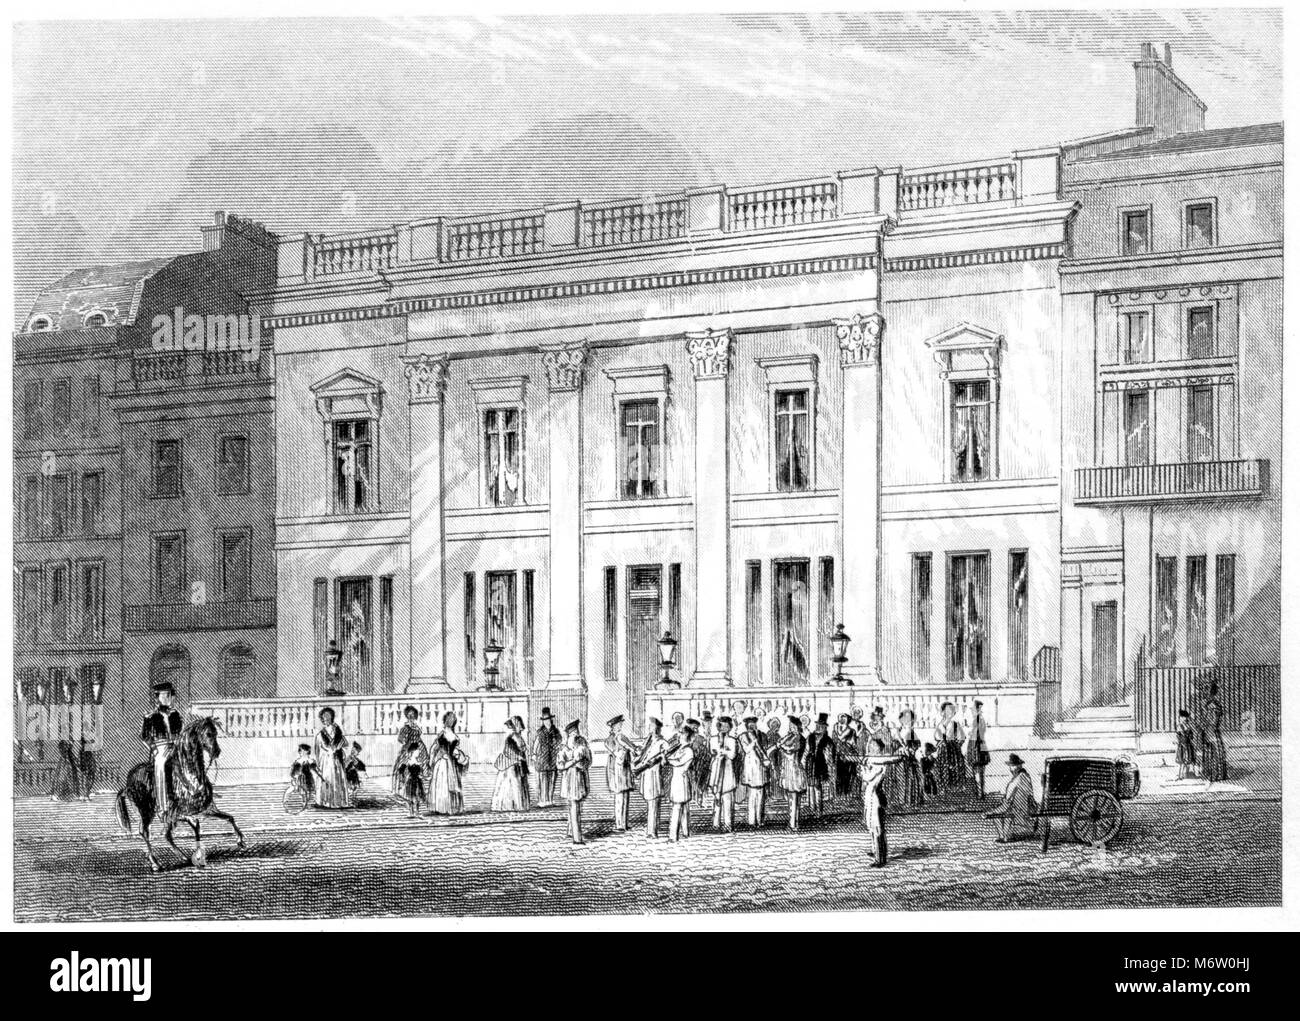 An engraving of Crockfords Club House, London scanned at high resolution from a book printed in 1851. Believed copyright free. Stock Photo